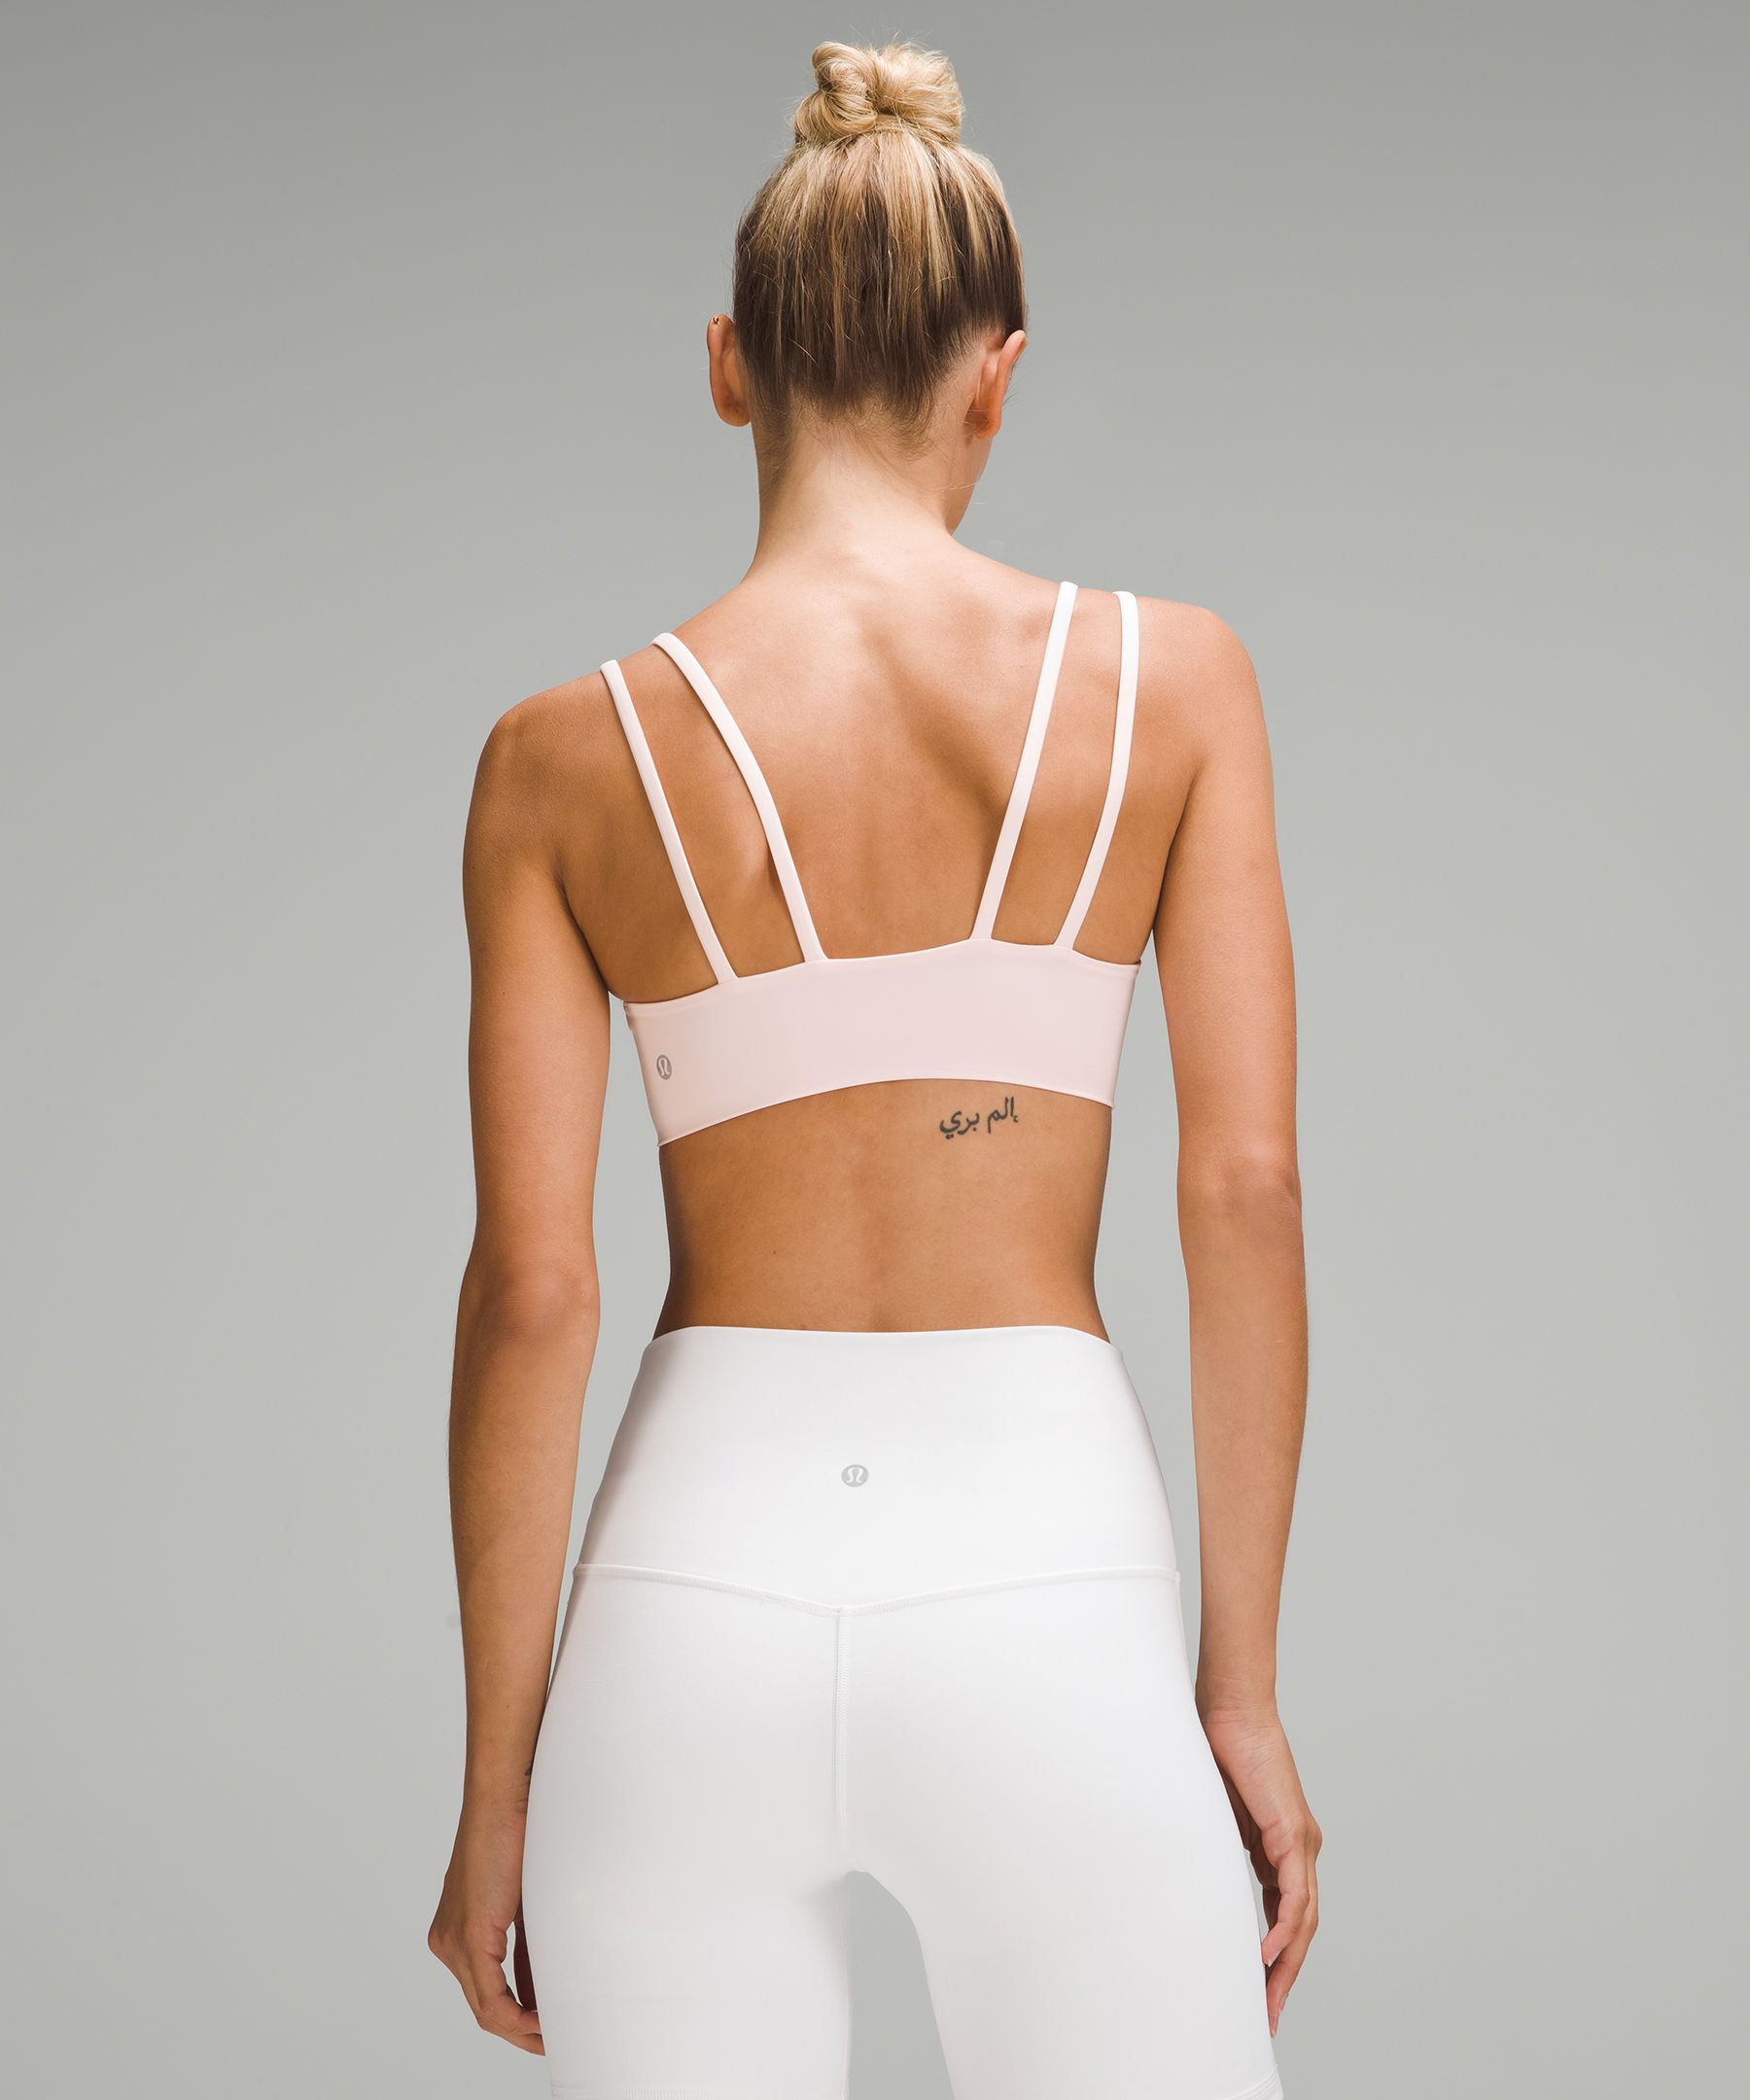 This Clip-Back Lululemon Bra Is So Easy to Put On